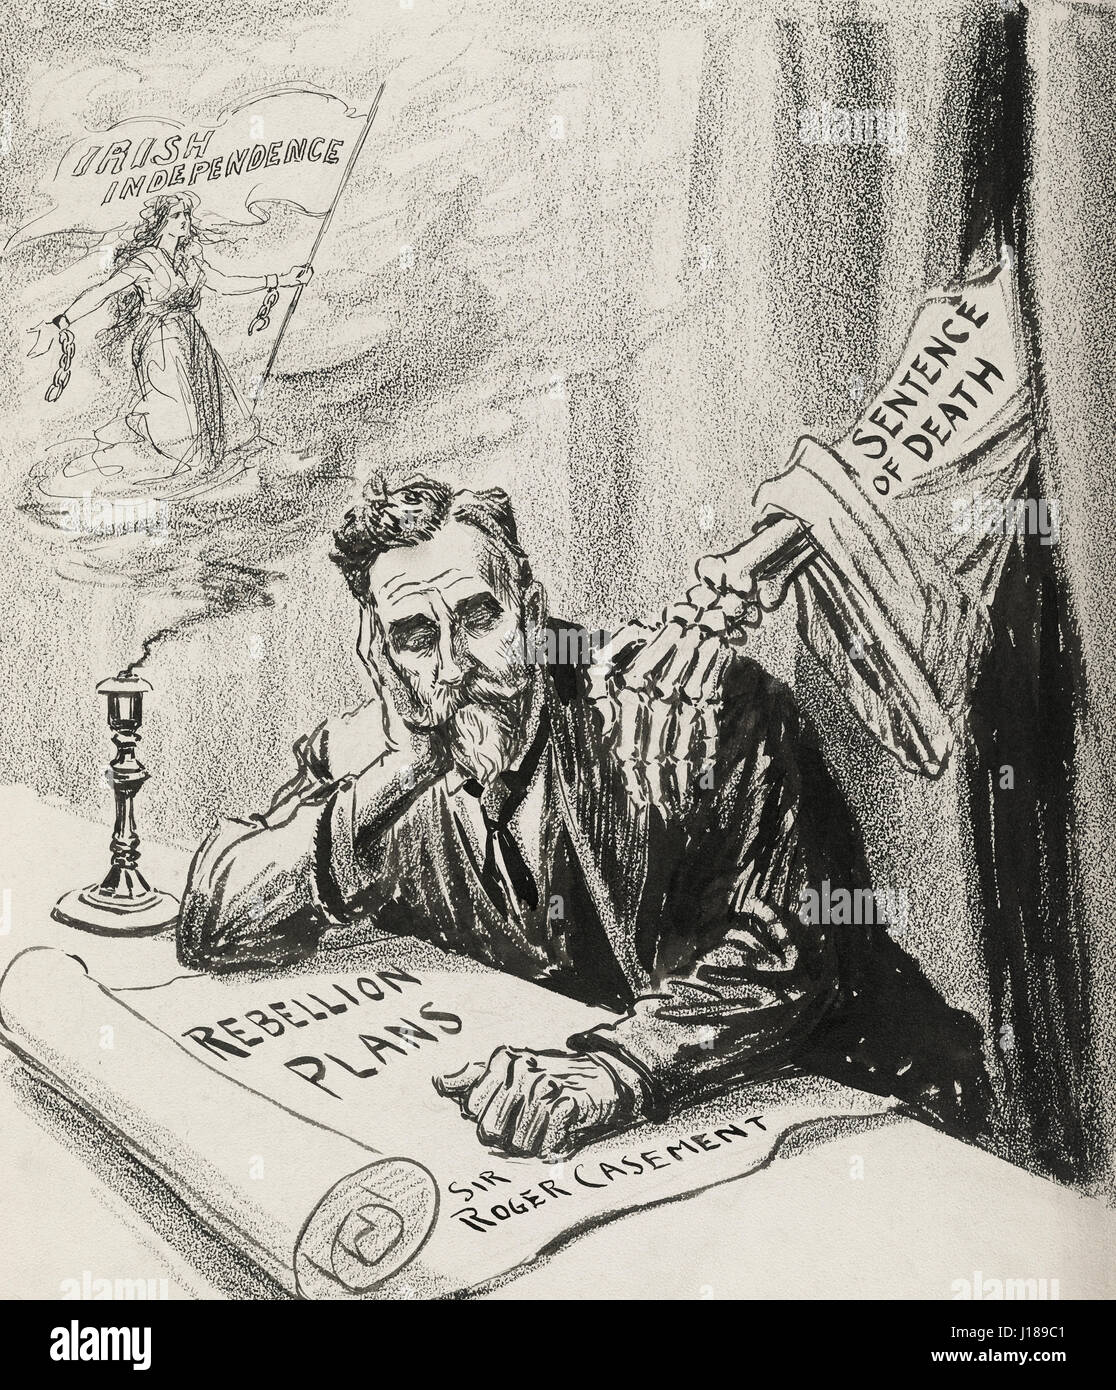 The fading dream, or the rude awakening. PoliticalCartoon shows a skeletal hand (labeled 'Sentence of Death') on the shoulder of Sir Roger Casement who holds a document labeled 'Rebellion Plans' and dreams of 'Irish Independence.' In 1916, the British hanged Casement (who had tried to enlist the help of the Germans in gaining Irish independence) as a traitor. 1916 Stock Photo